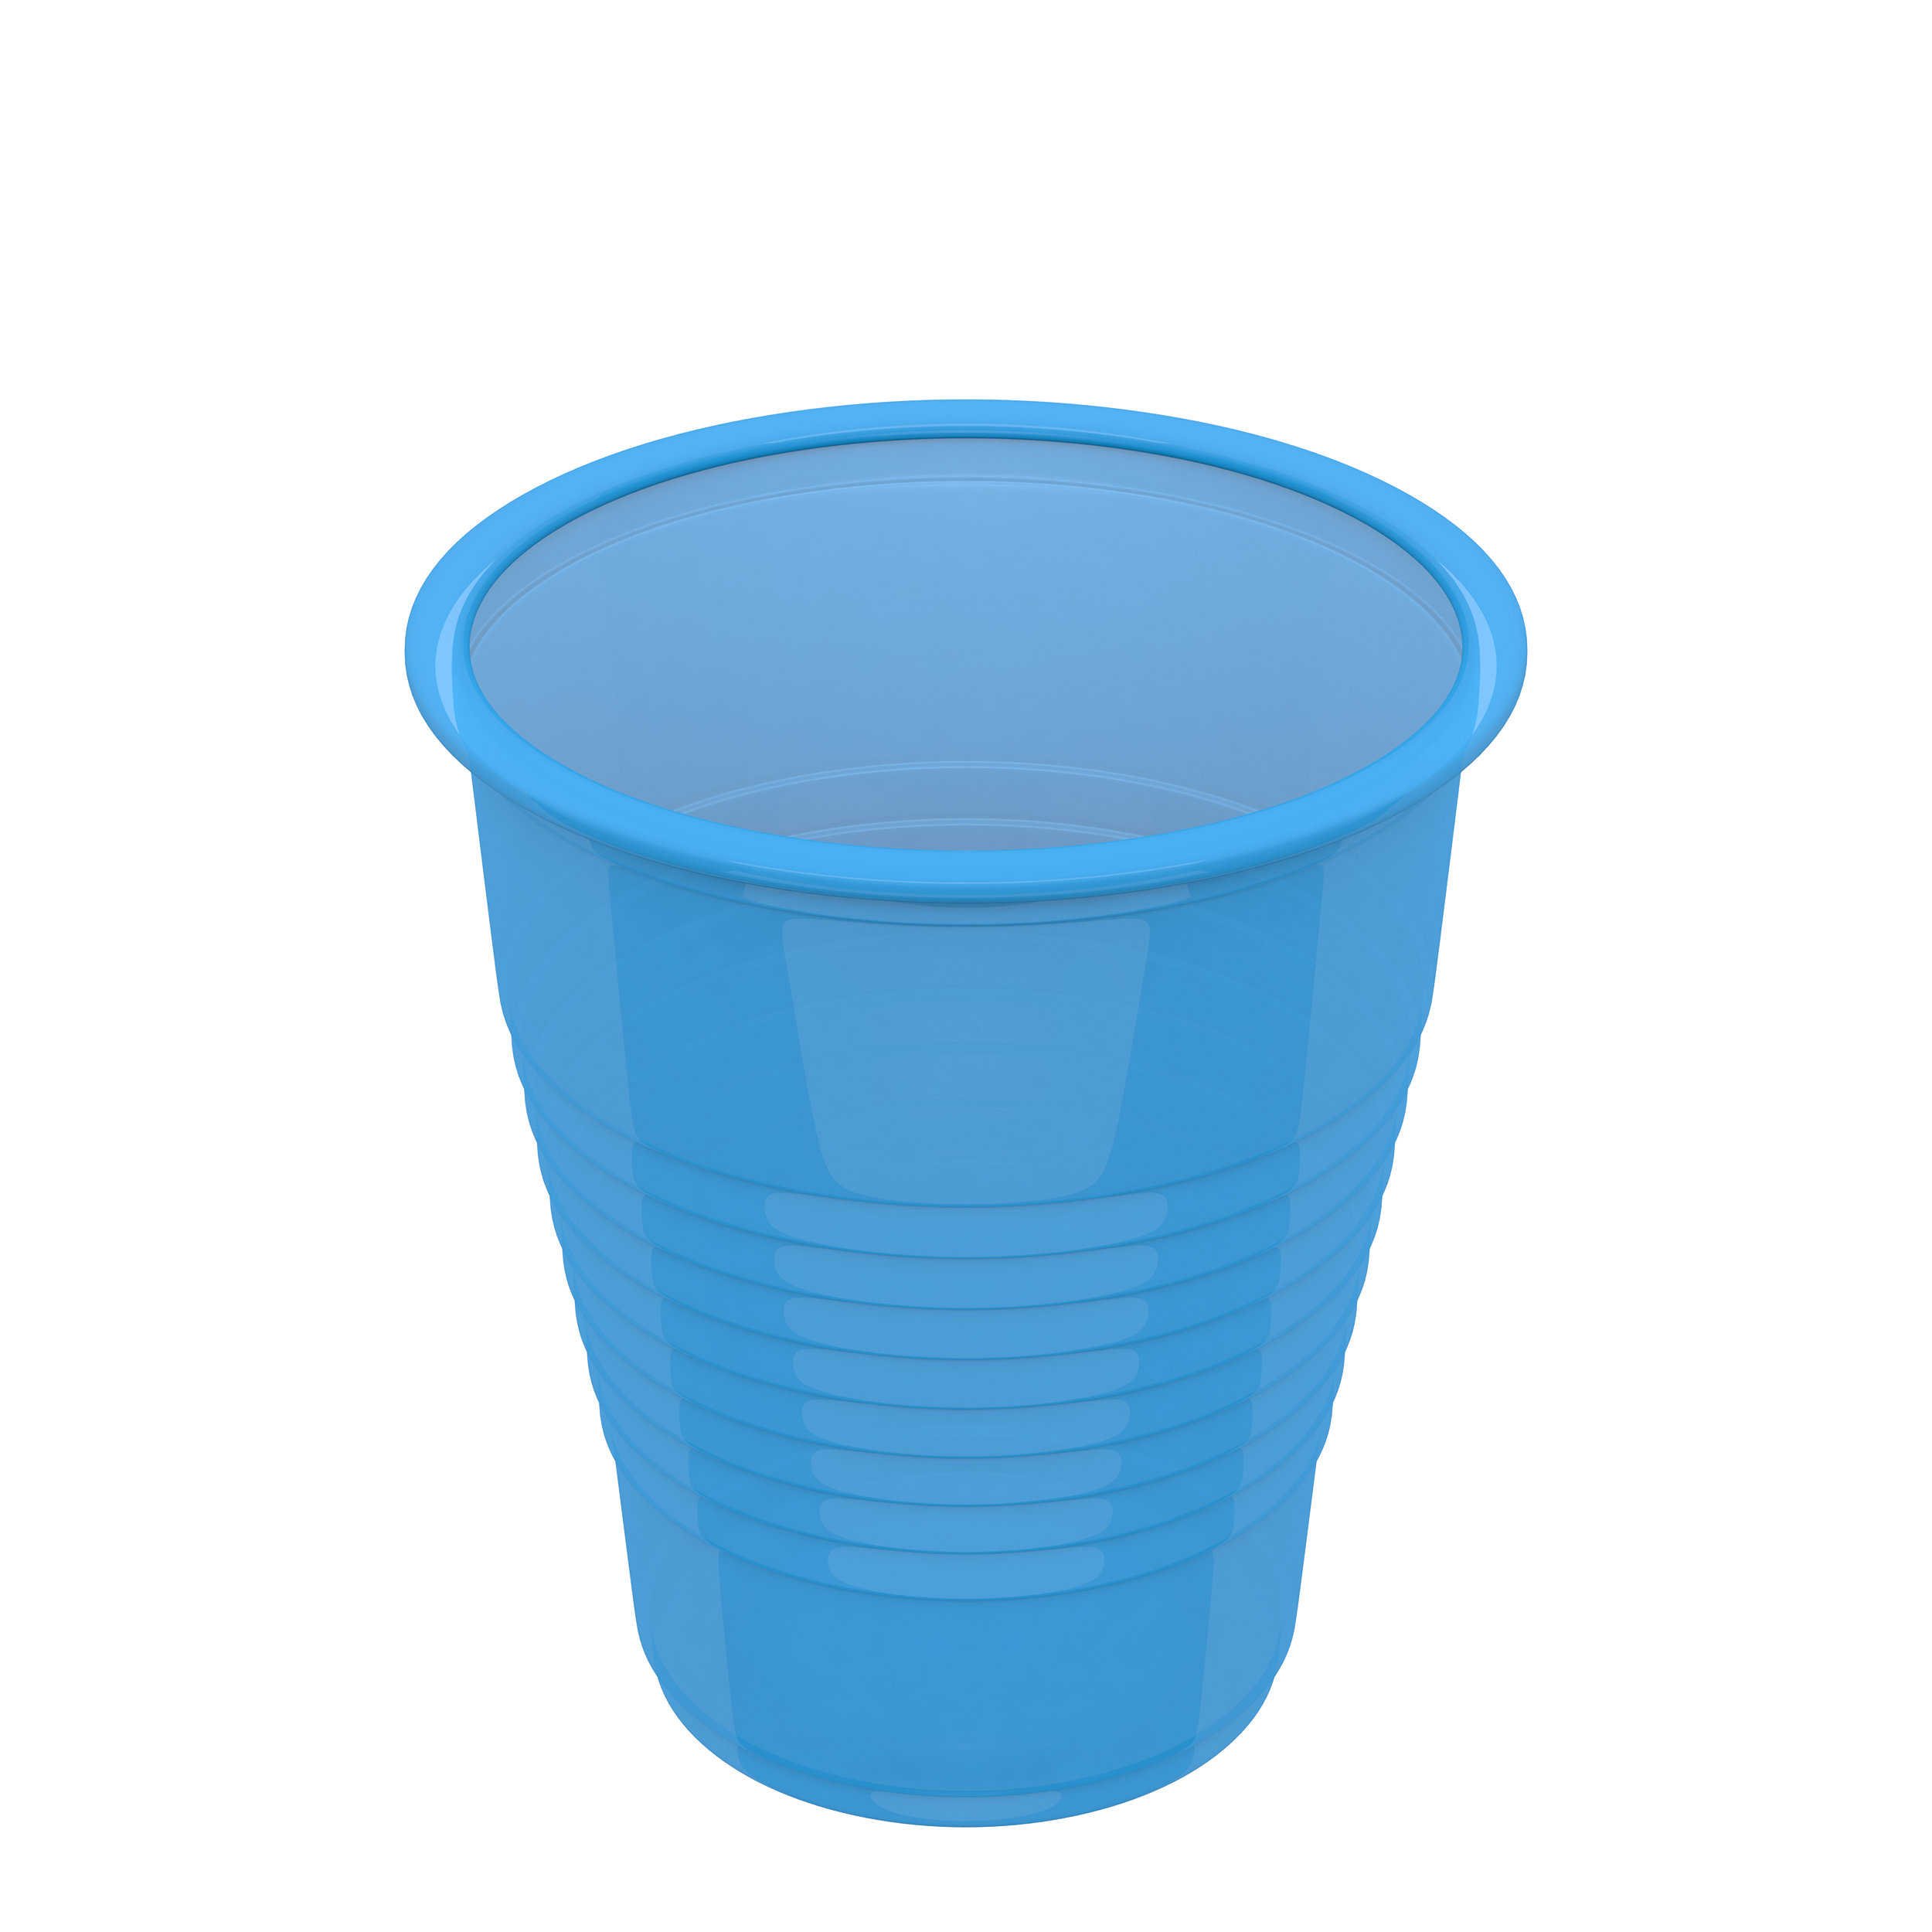 Dynarex High Value 5 oz. Drinking Cups - Case of 50